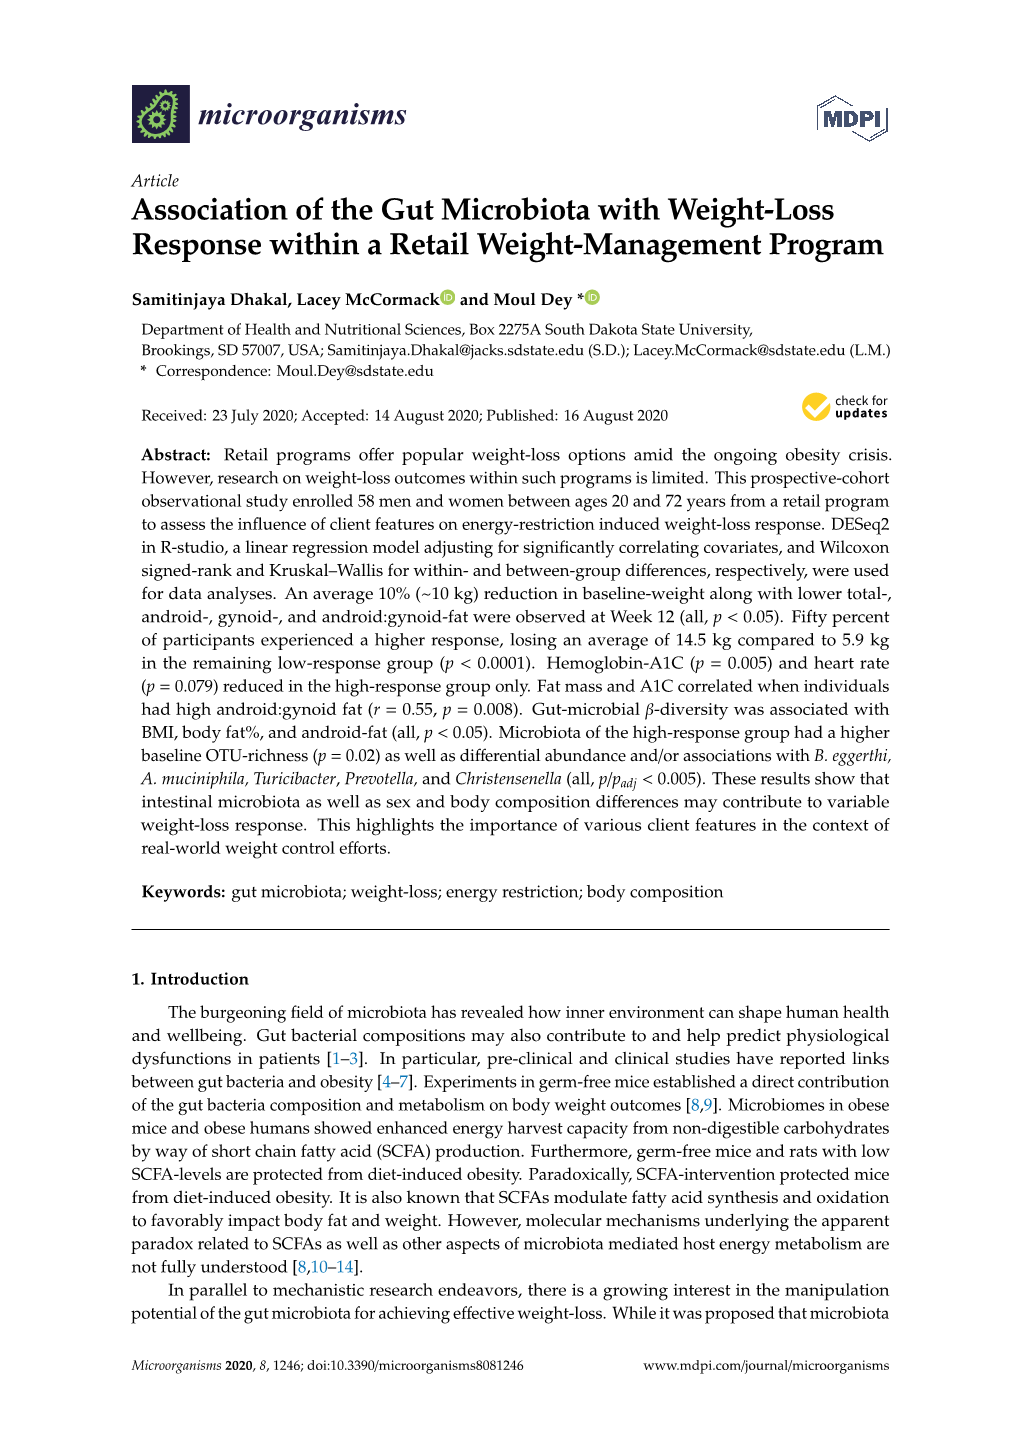 Association of the Gut Microbiota with Weight-Loss Response Within a Retail Weight-Management Program